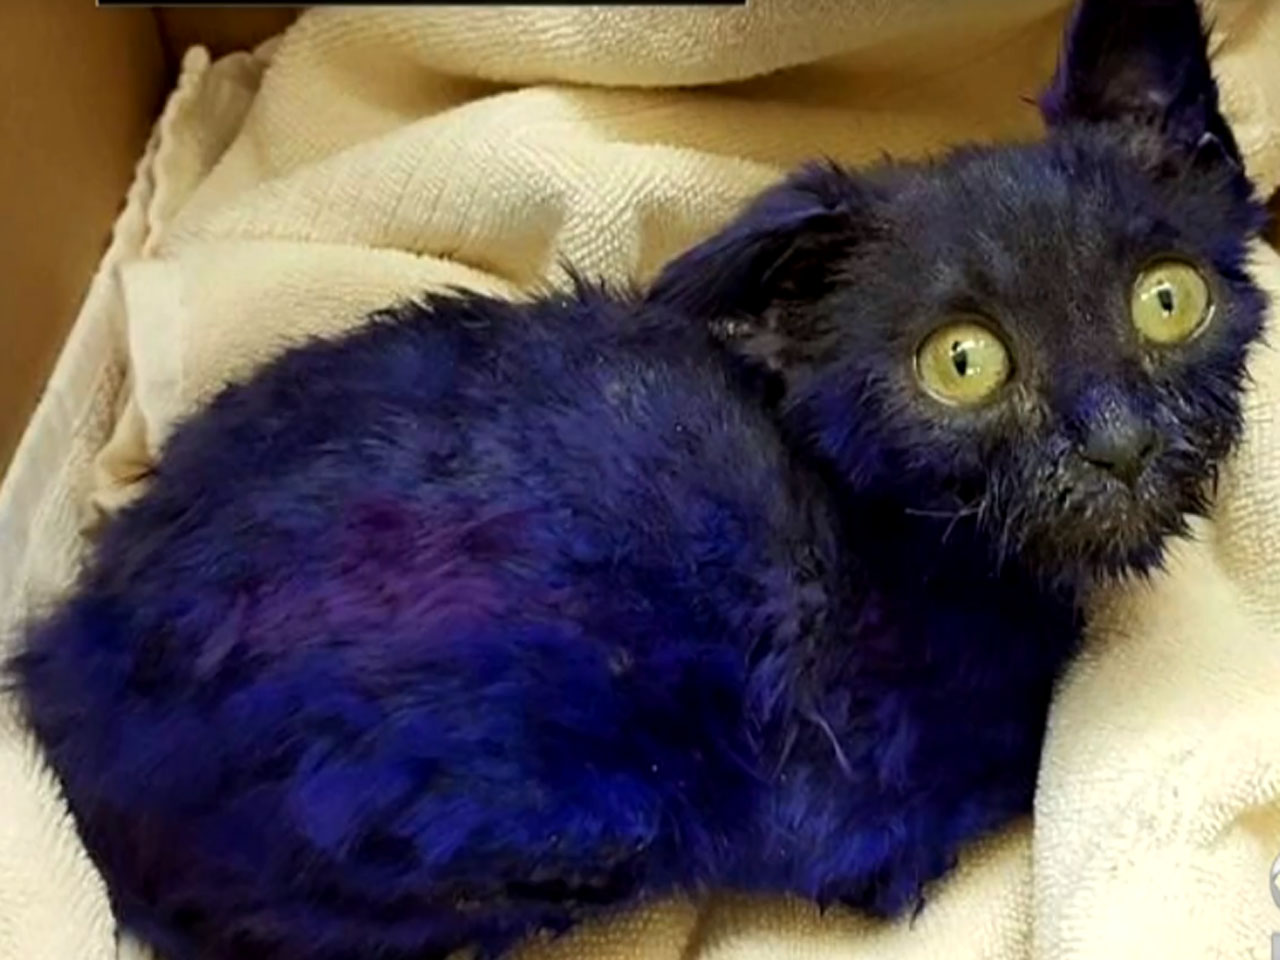  Purple  dyed kitten used as chew toy for other animals 